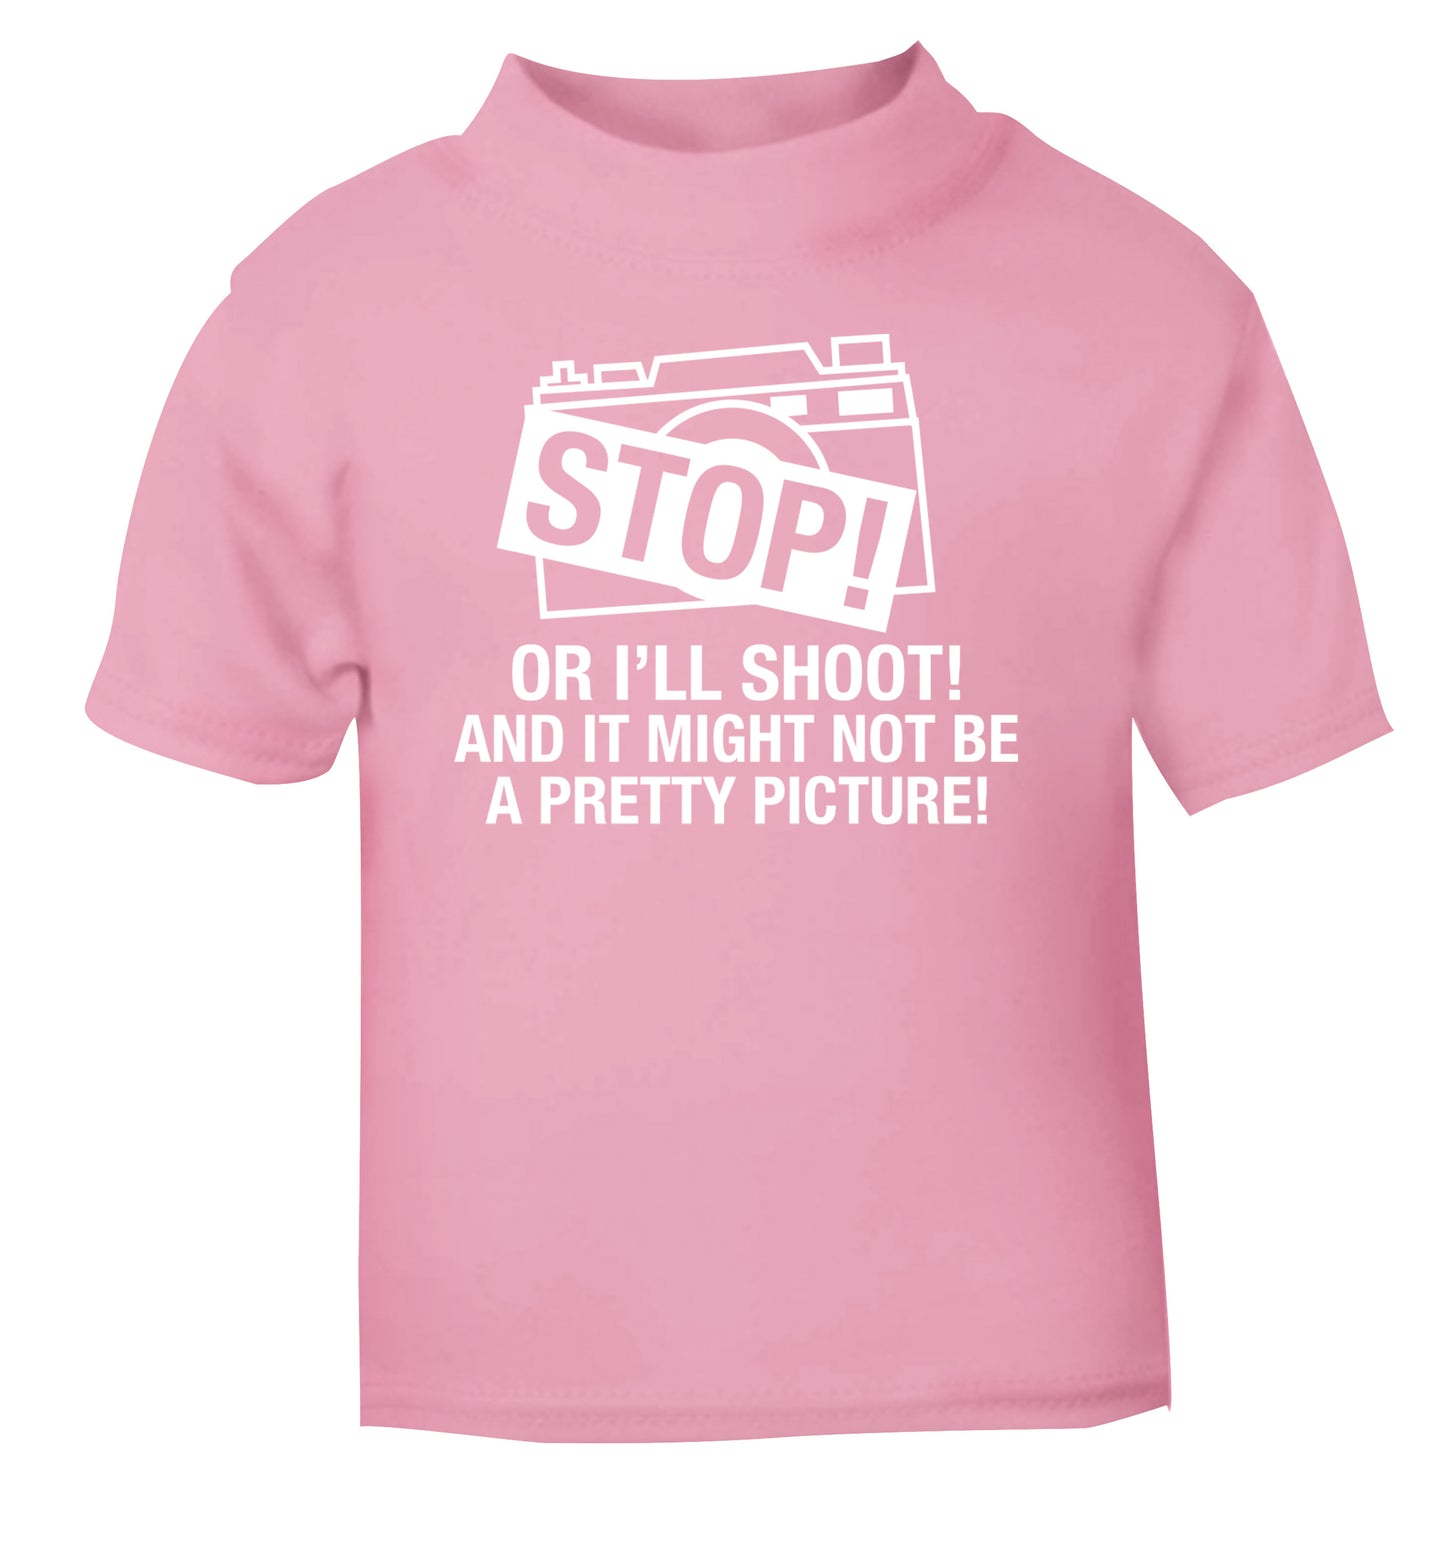 Stop or I'll shoot and it won't be a pretty picture light pink Baby Toddler Tshirt 2 Years